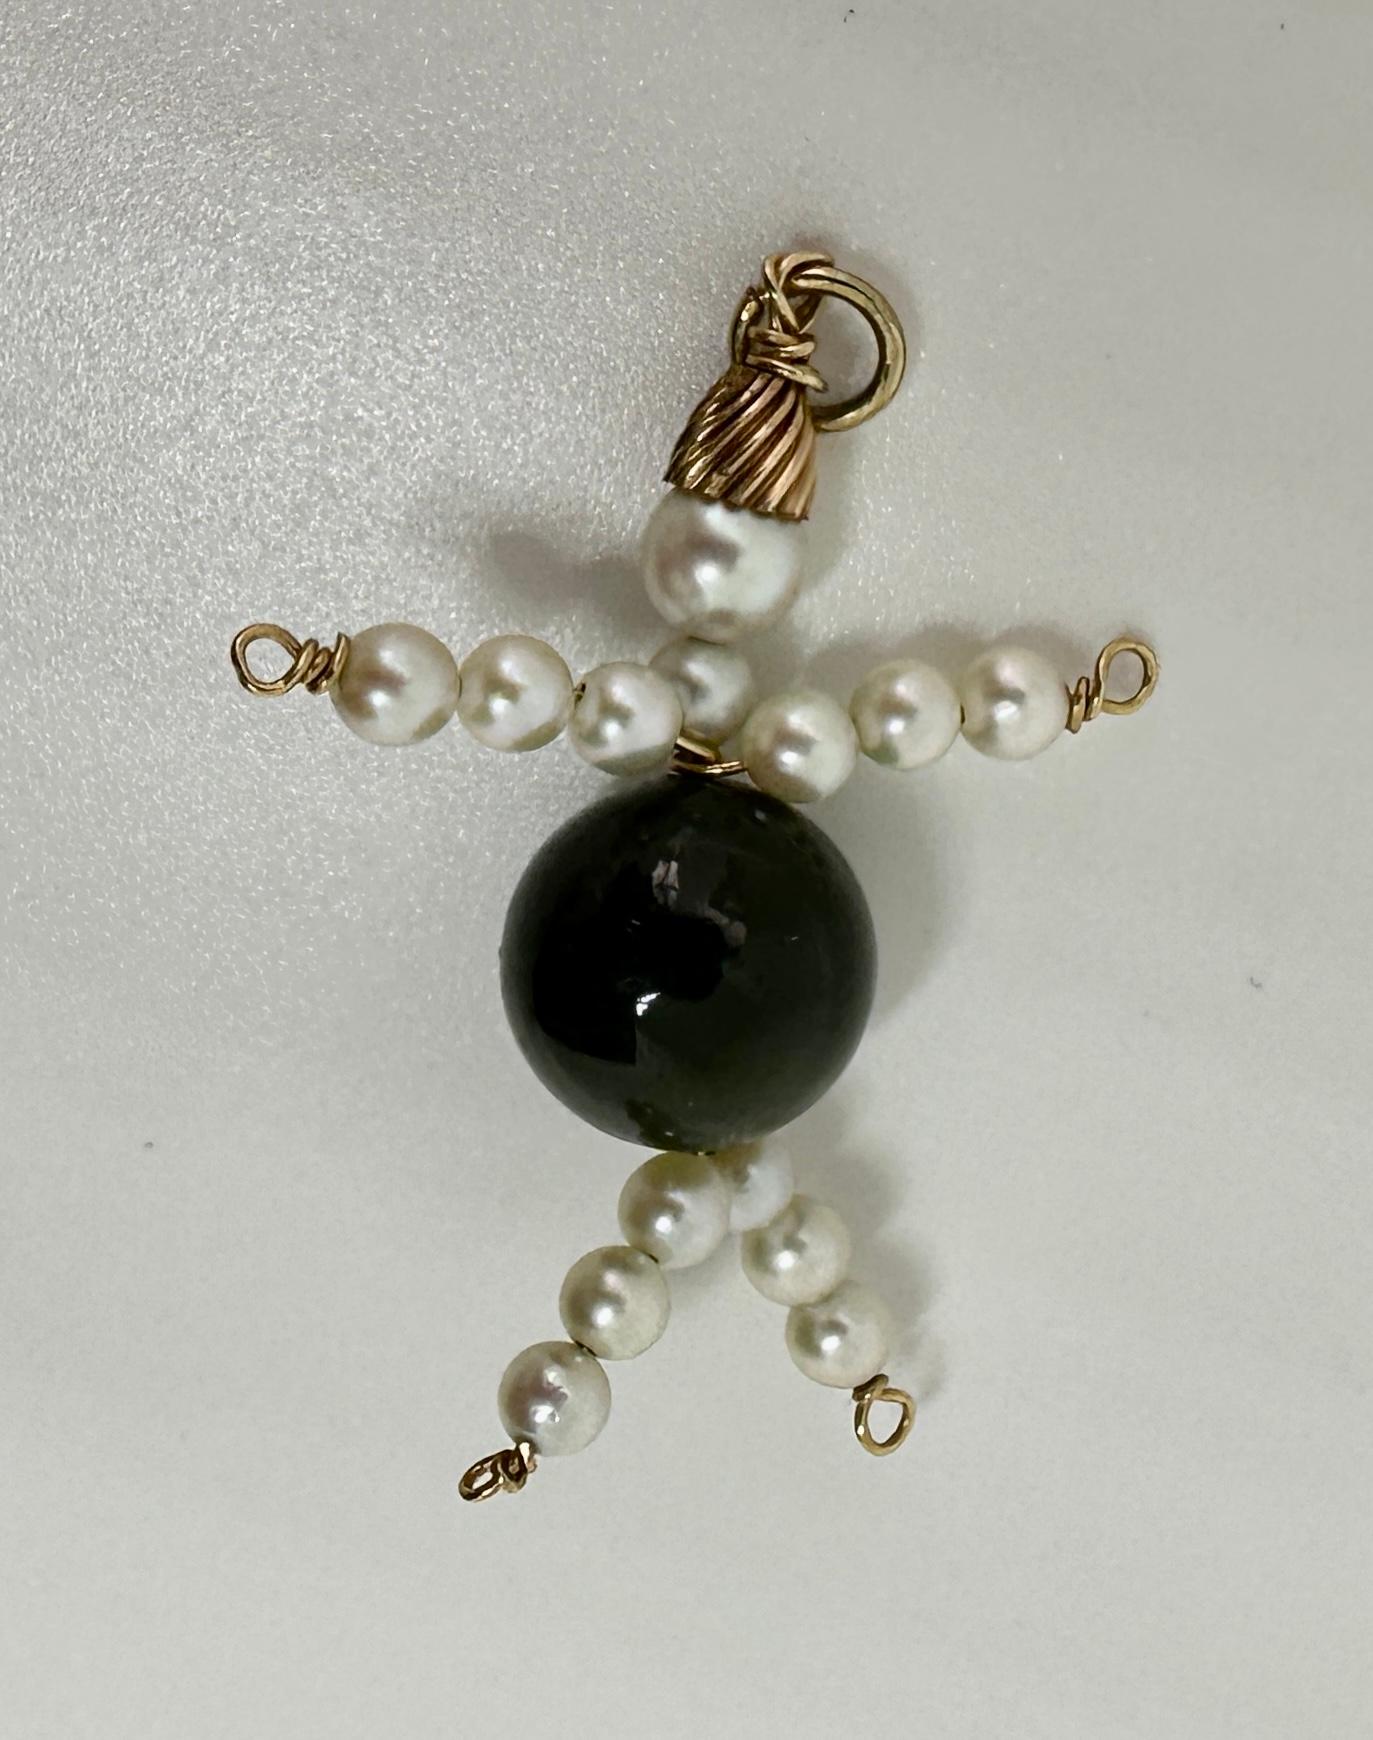 Lady Man Pendant Charm Necklace Black Onyx Pearl 14 Karat Gold Antique Retro In Excellent Condition For Sale In New York, NY